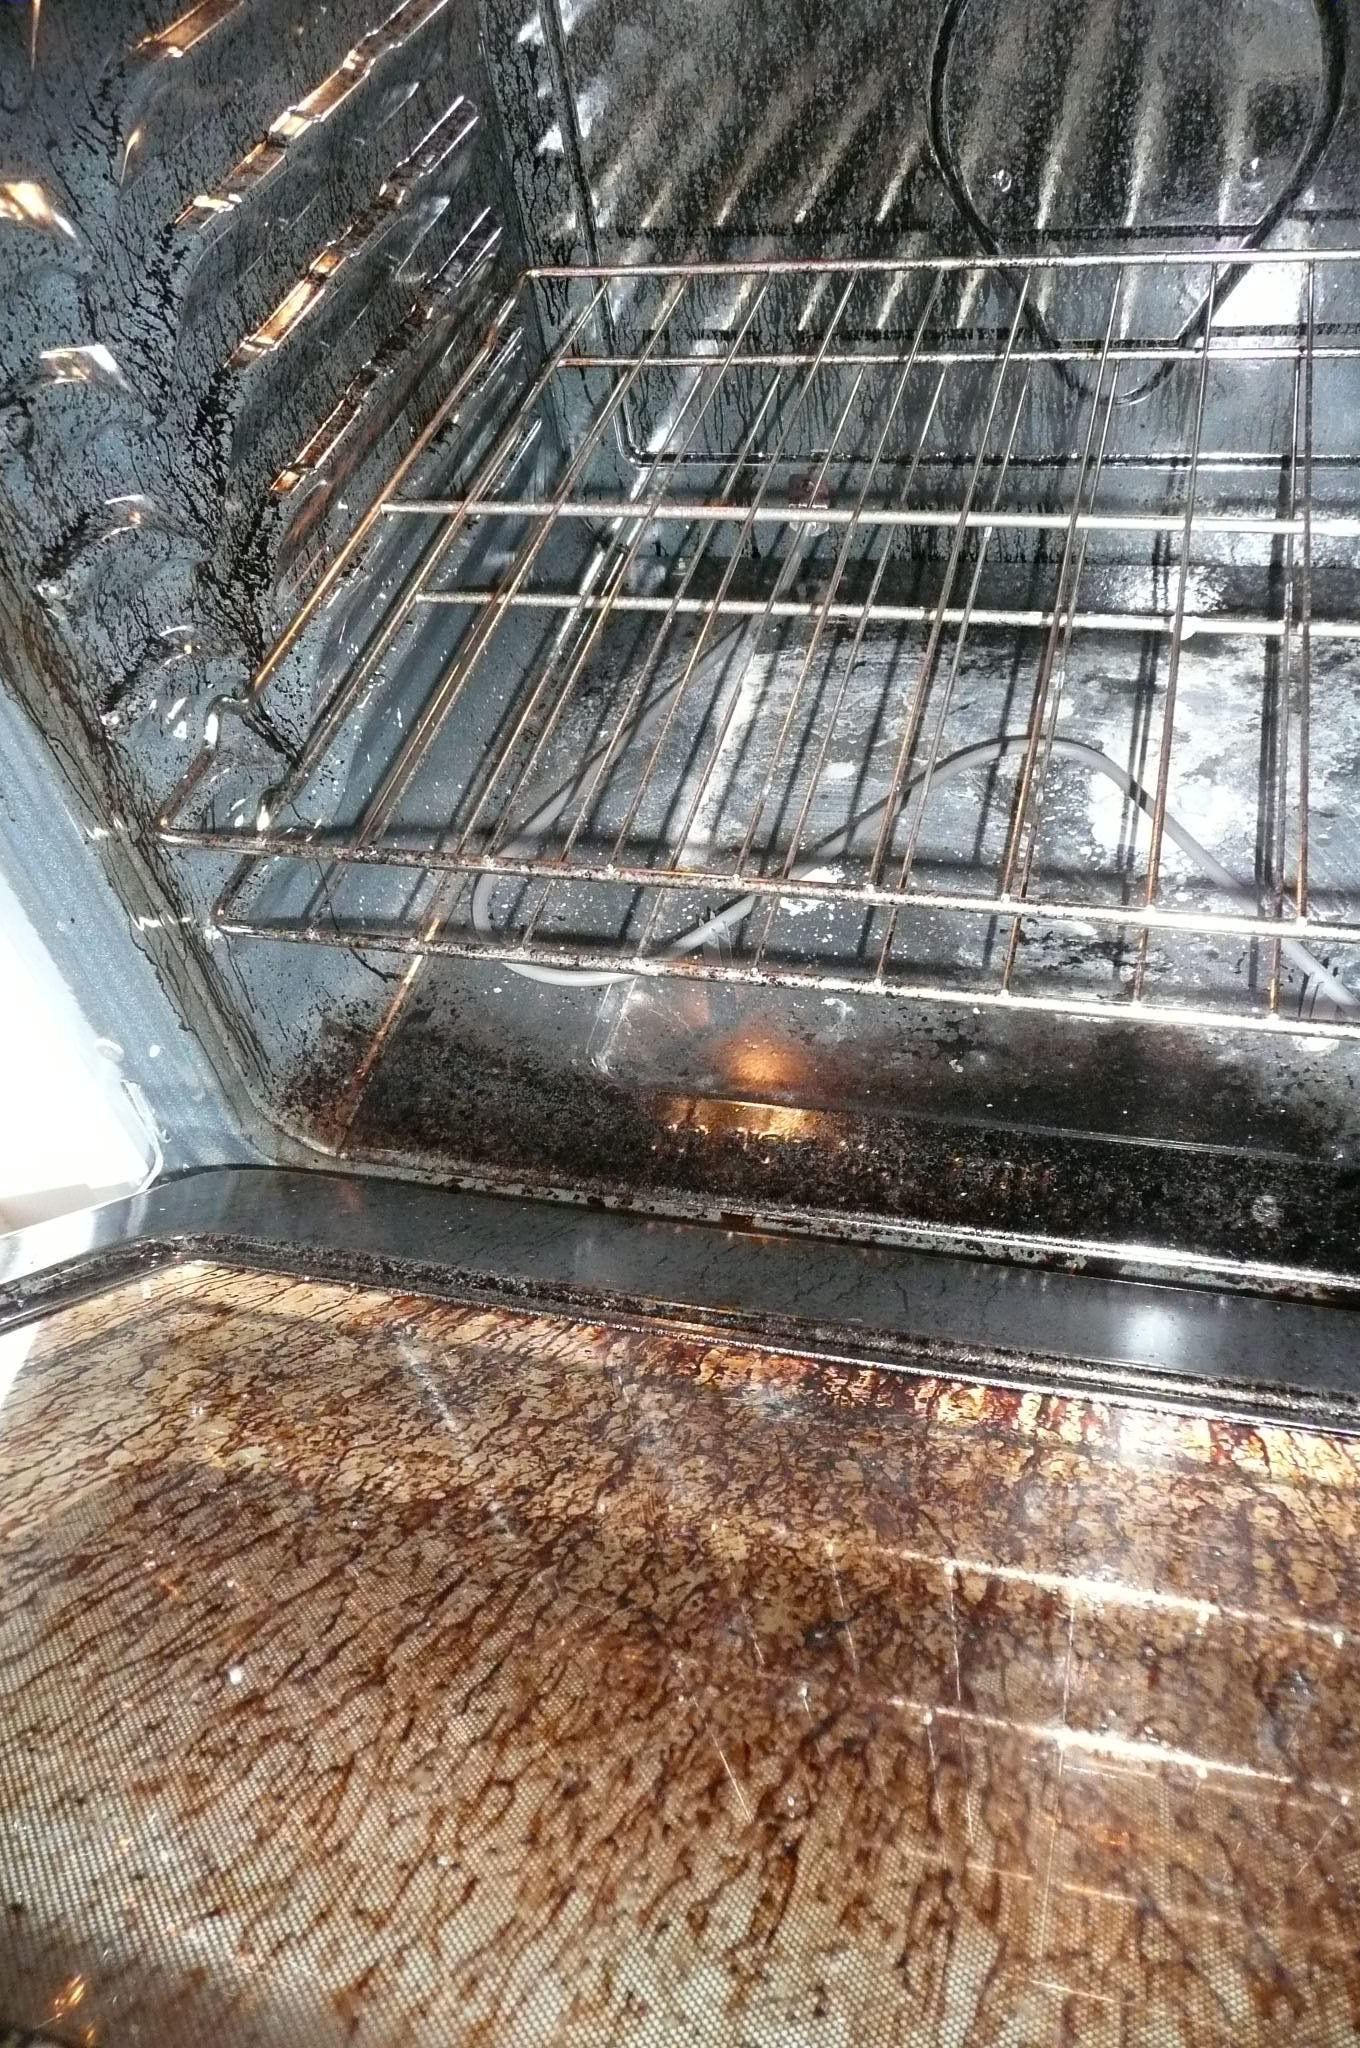 How do you manually clean a Kenmore oven?